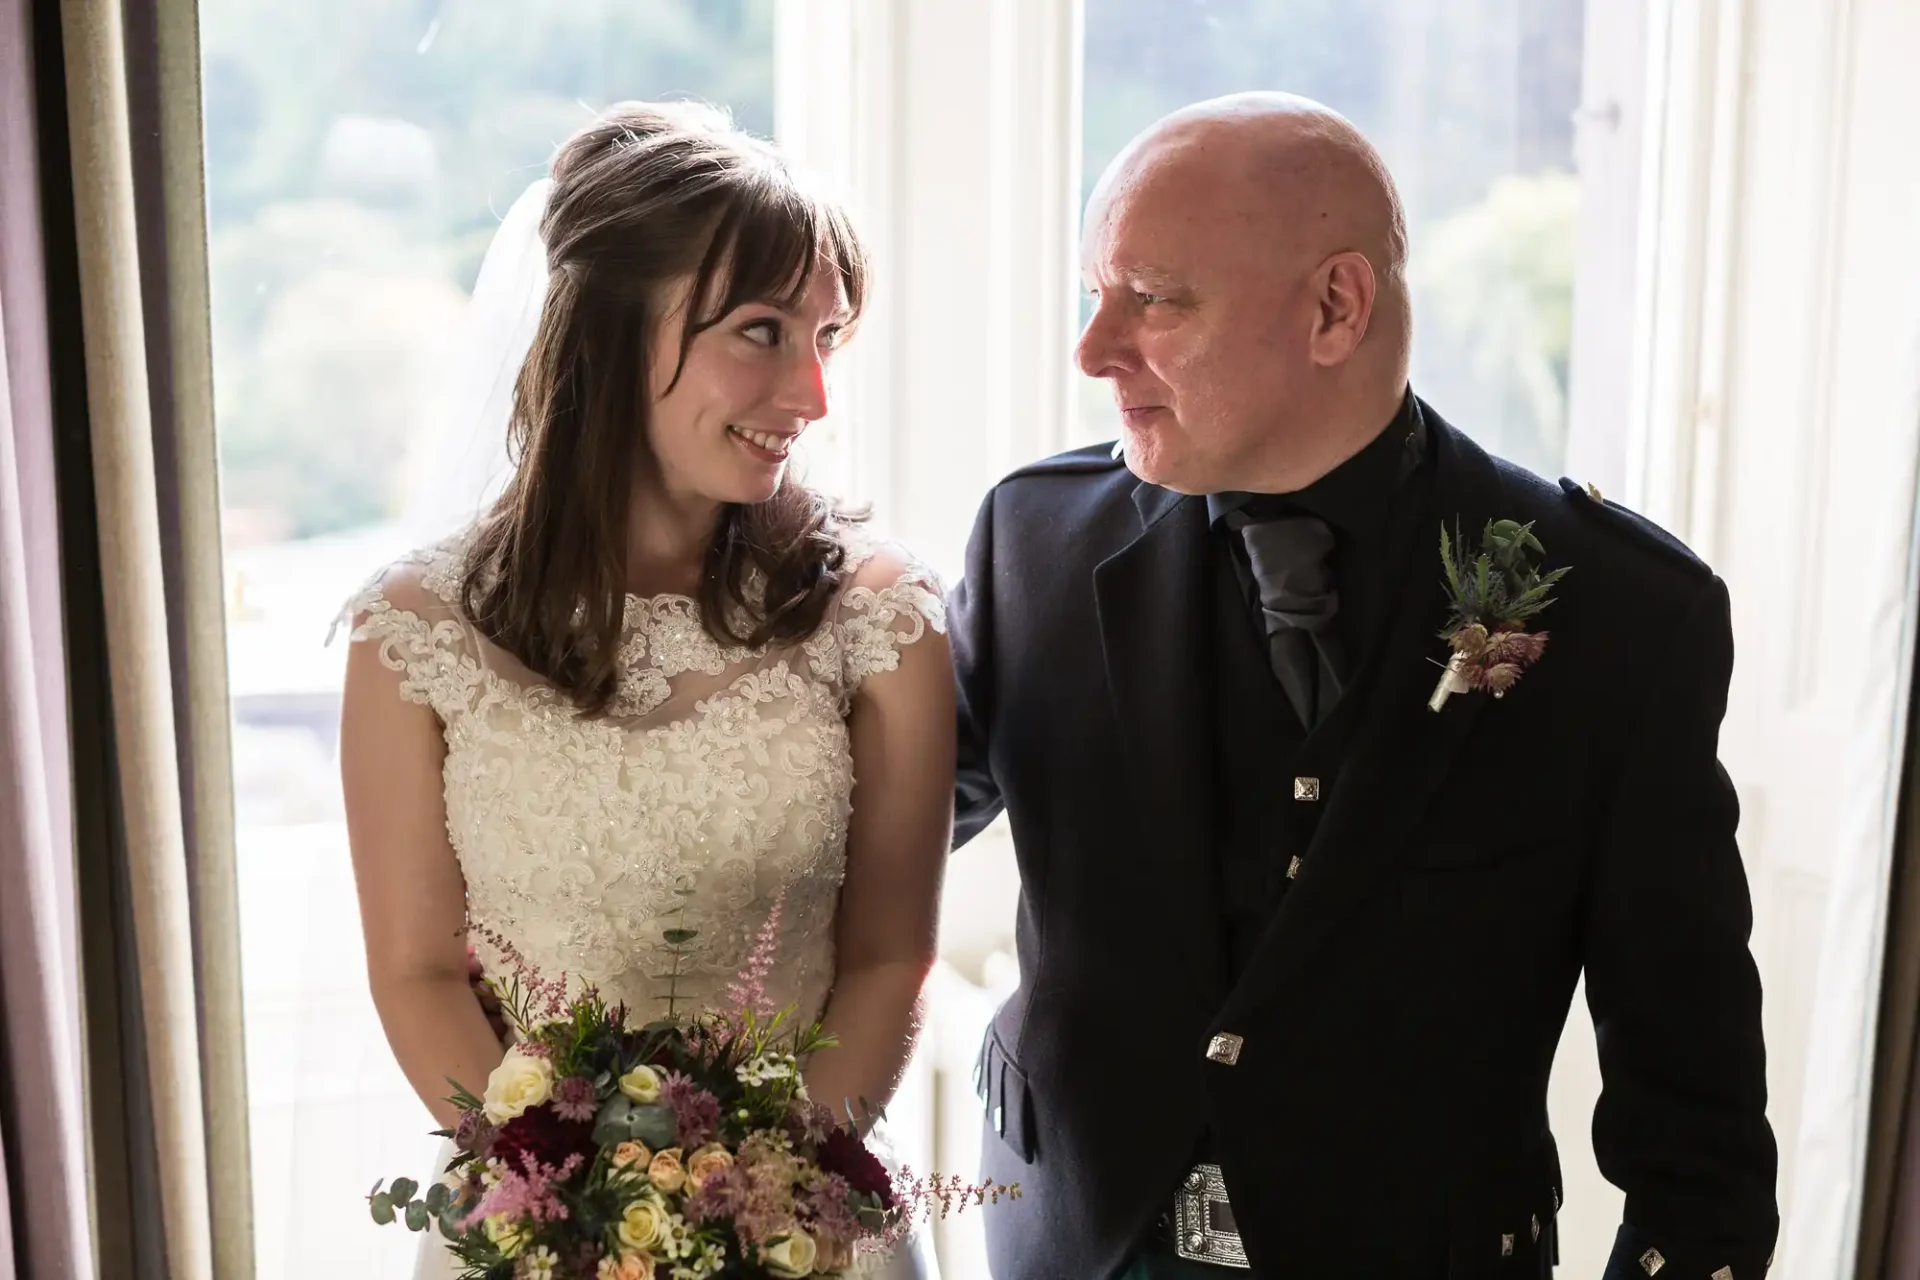 A bride in a lace dress and a man in a black suit with a boutonniere share a joyful glance indoors by a window.